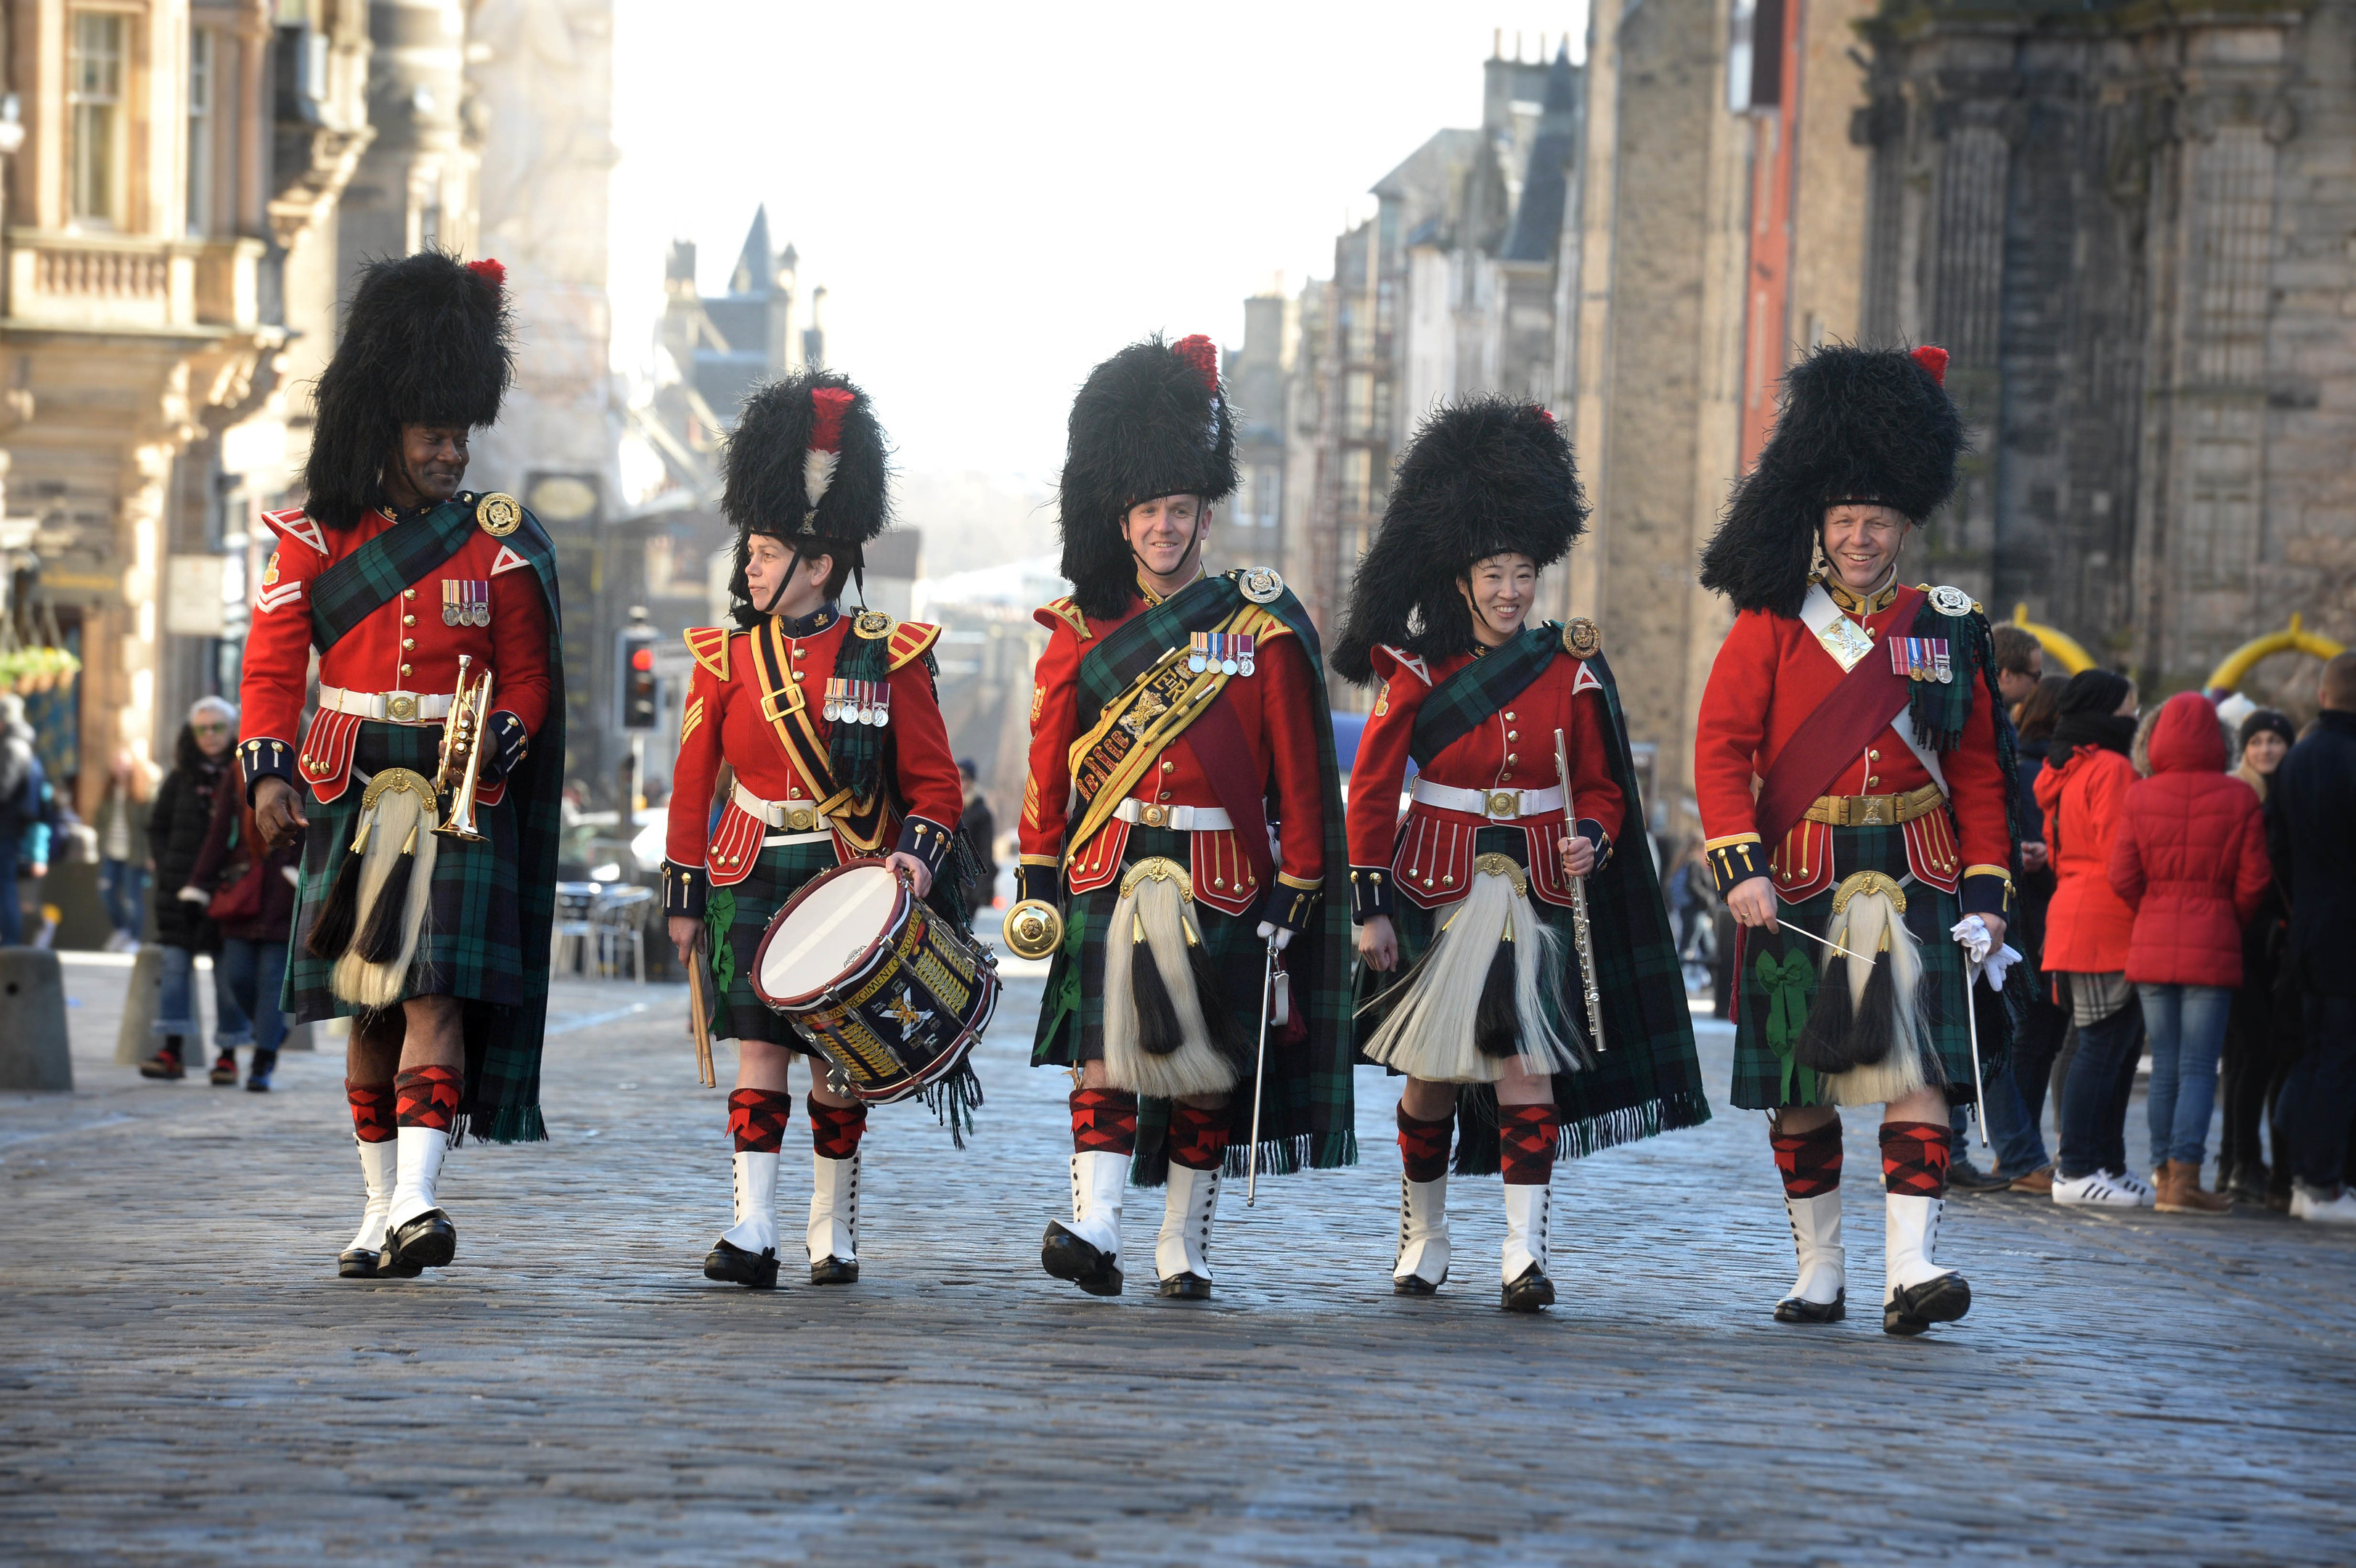 The Band of The Royal Regiment of Scotland on Edinburgh’s Royal Mile today